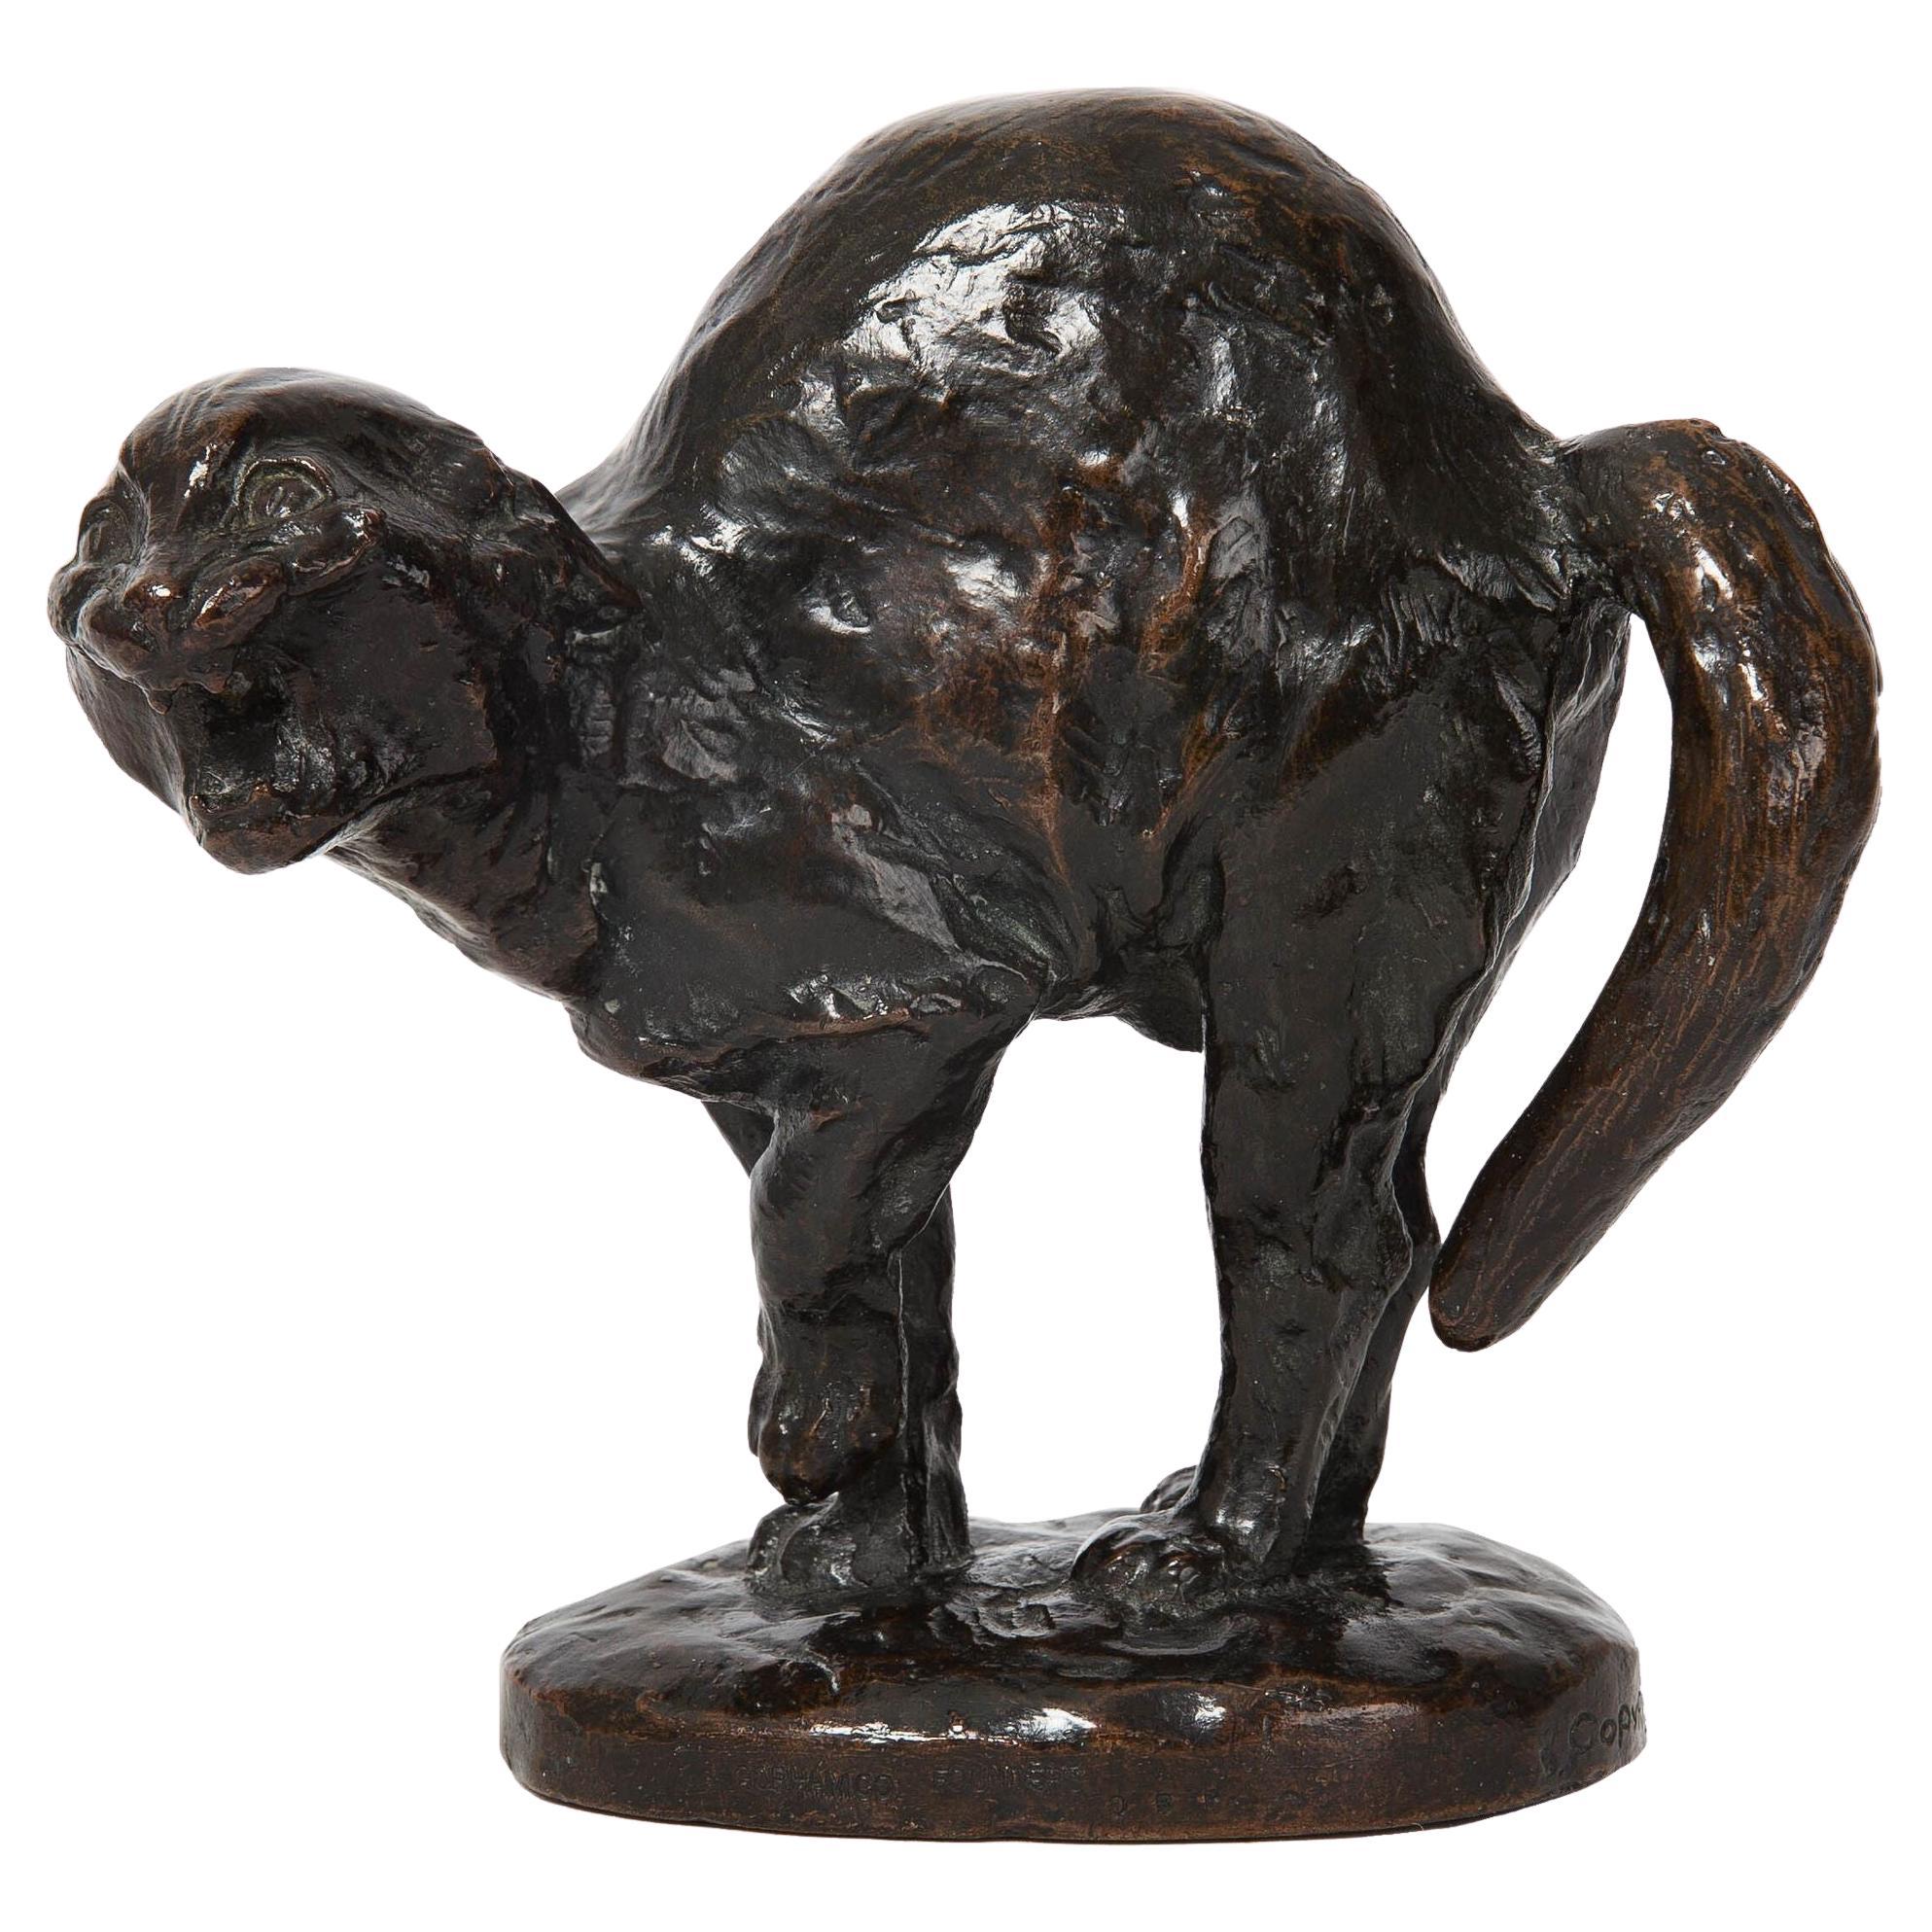 Authentic Frederick Roth "Hissing Cat" (1913) Bronze Sculpture, Gorham Co. For Sale